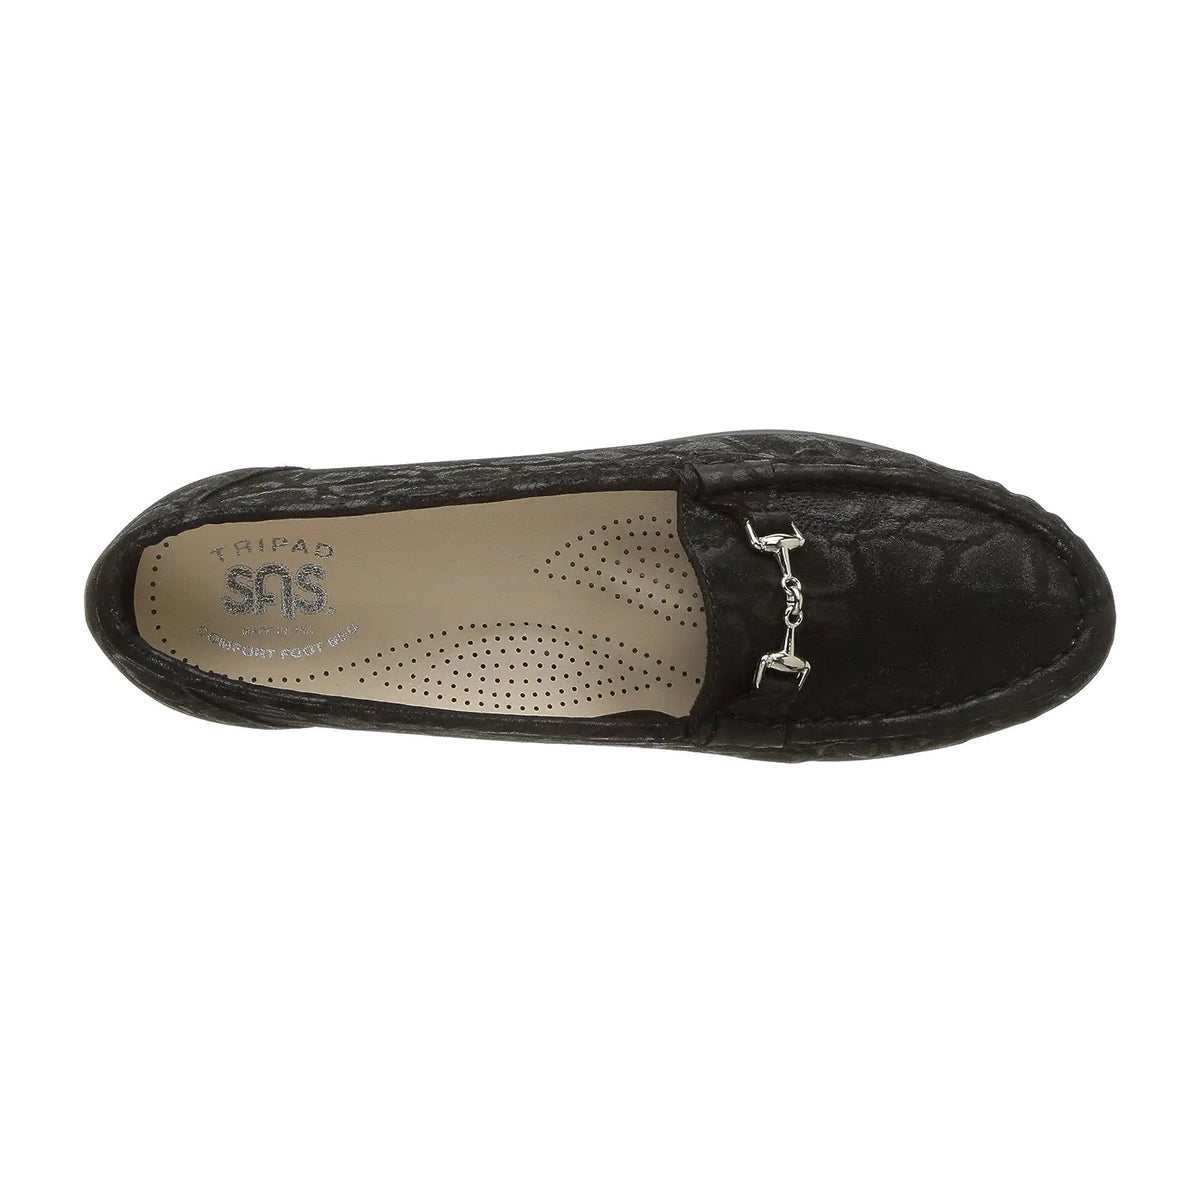 Top view of a black leather SAS METRO NERO SNAKE slip-on loafer displaying its insole and a visible brand label &quot;tripad.